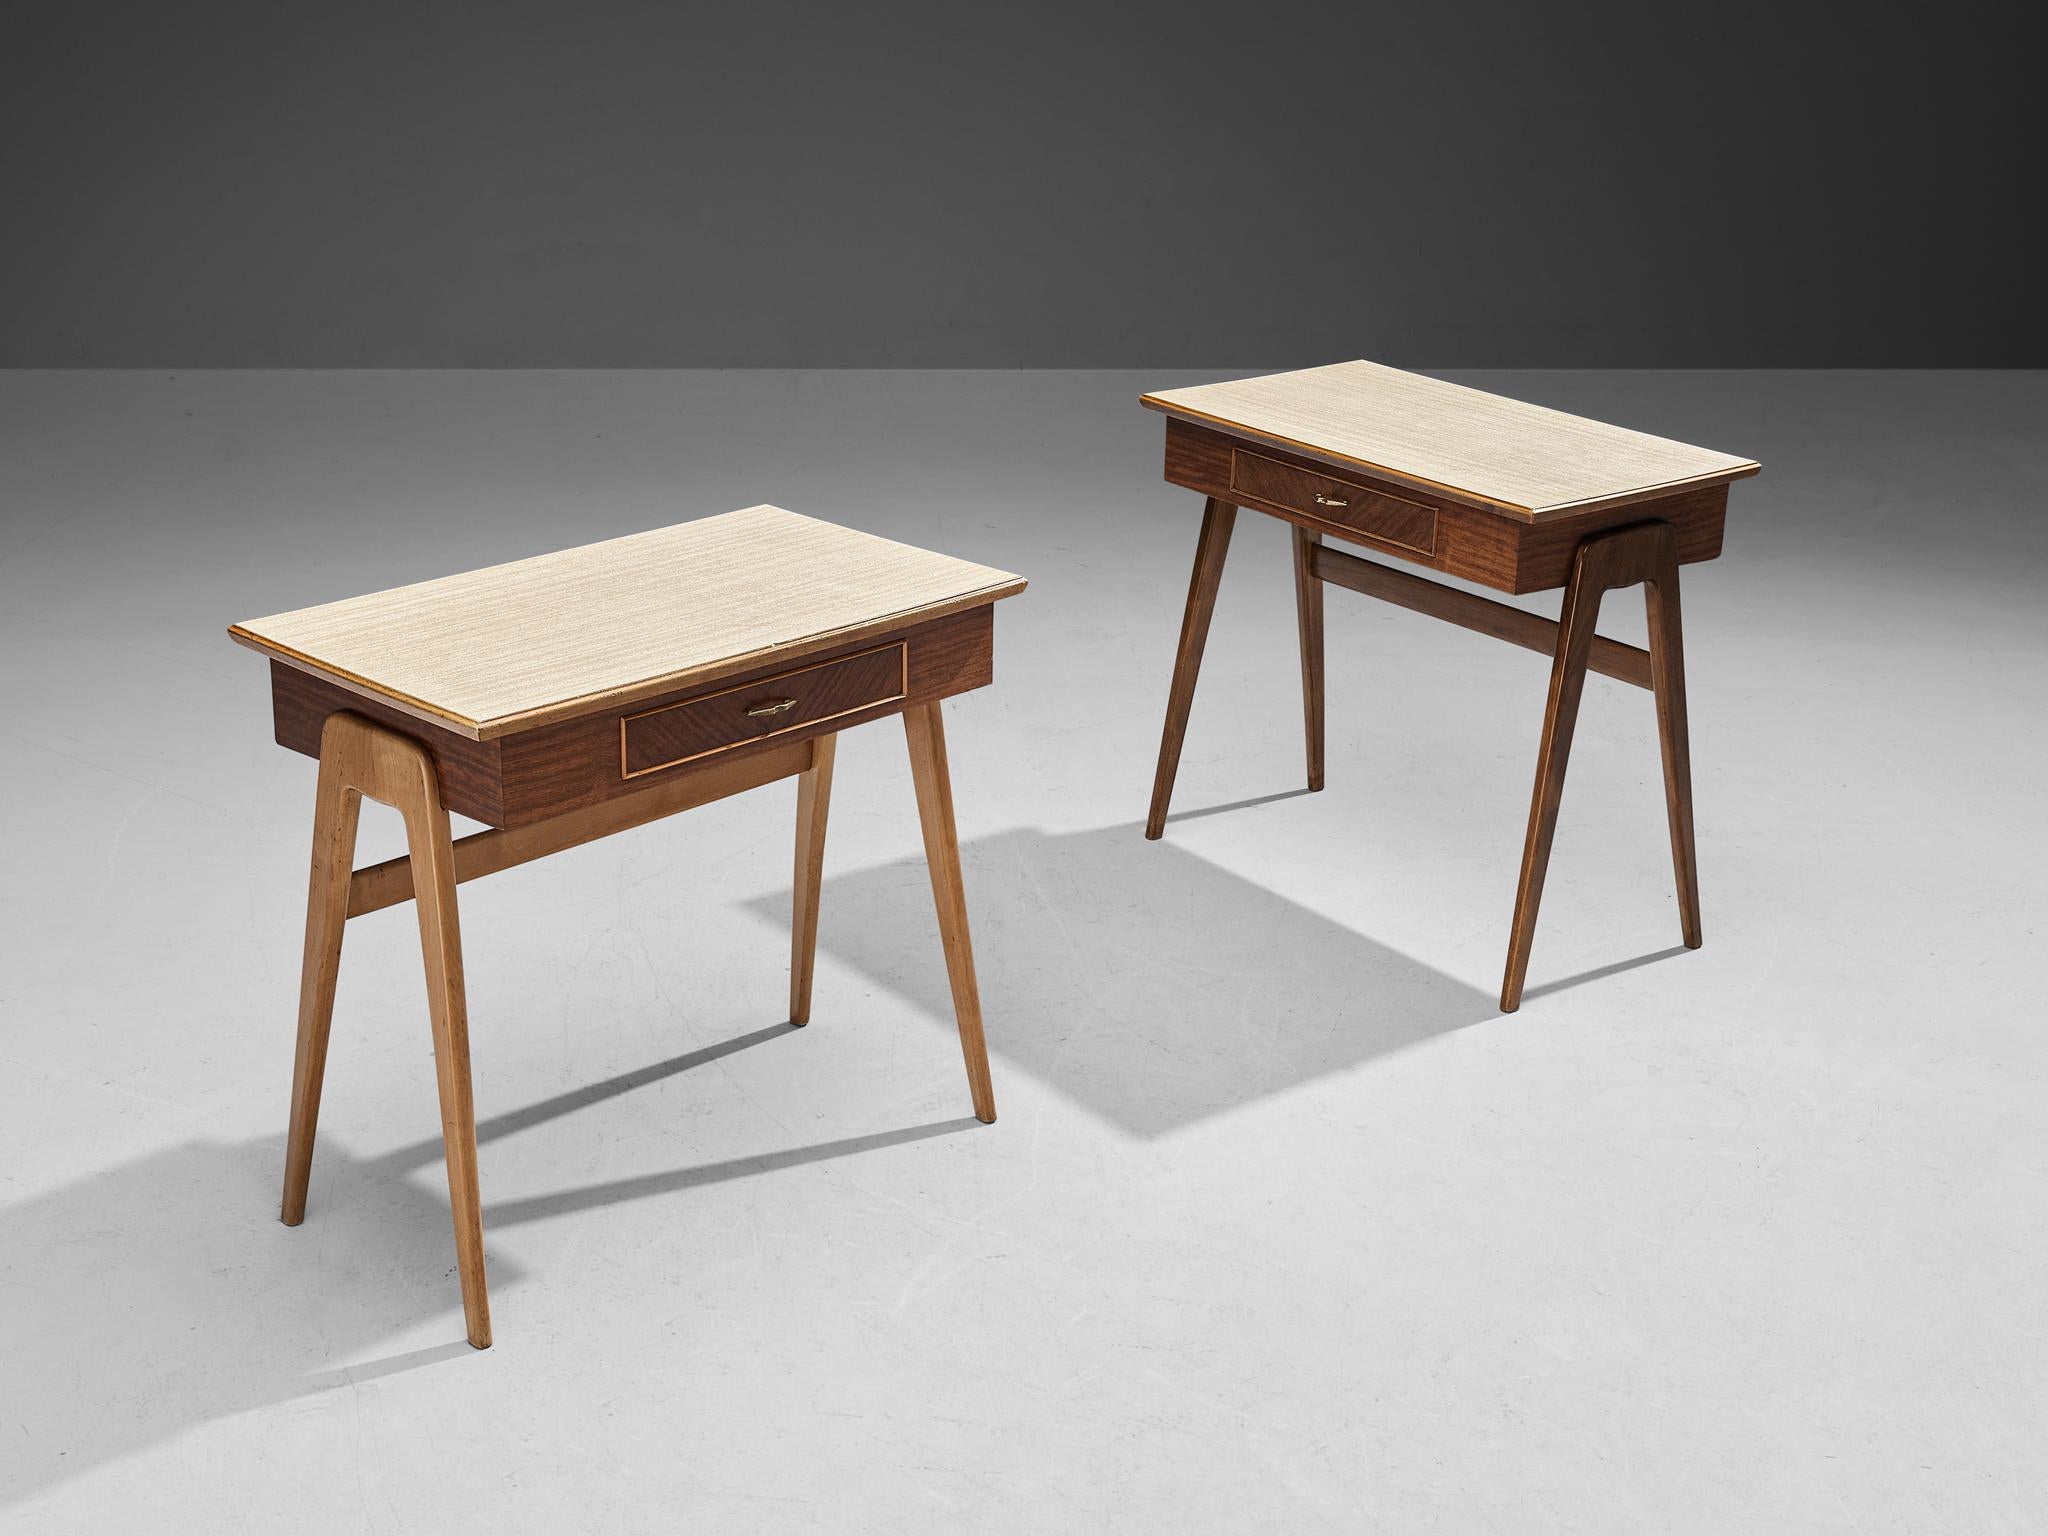 Set of writing desks, mahogany veneer, walnut, brass, formica, Italy, 1950s

Very elegant desks made in Italy in the 1950s. These desks are executed in a walnut frame. The upper part of these pieces are veneered, and the top is inlayed with a very